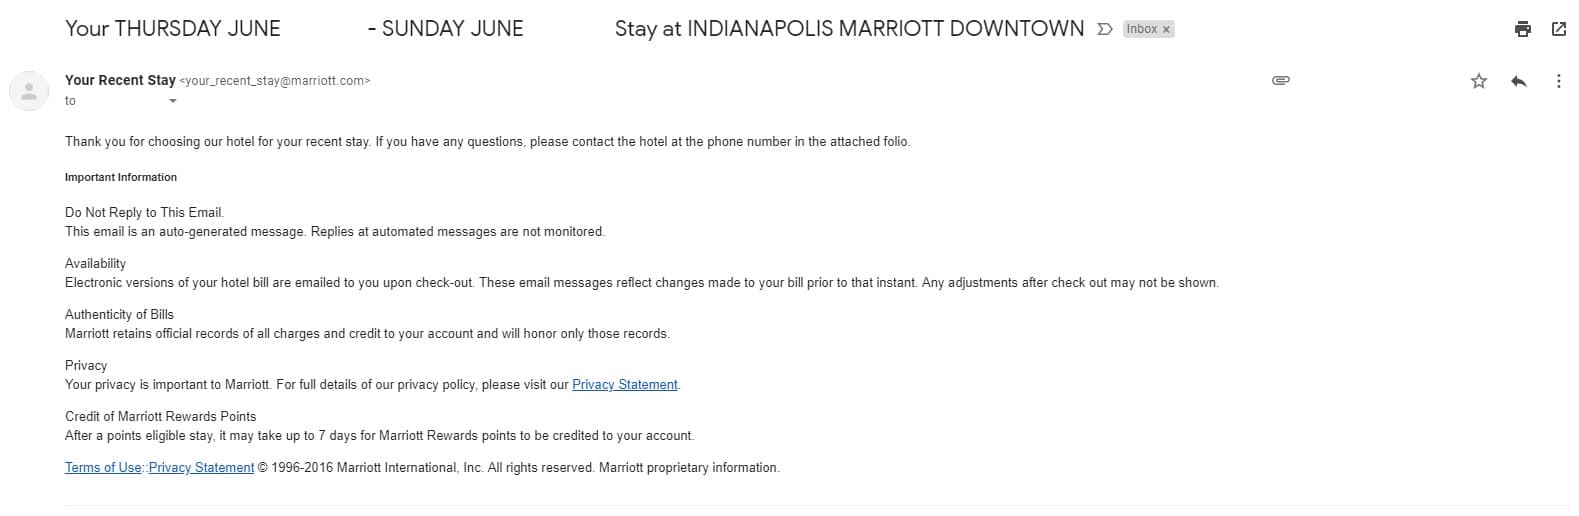 Our final example is of a follow-up email sent after a recent visit to a Marriott hotel. 